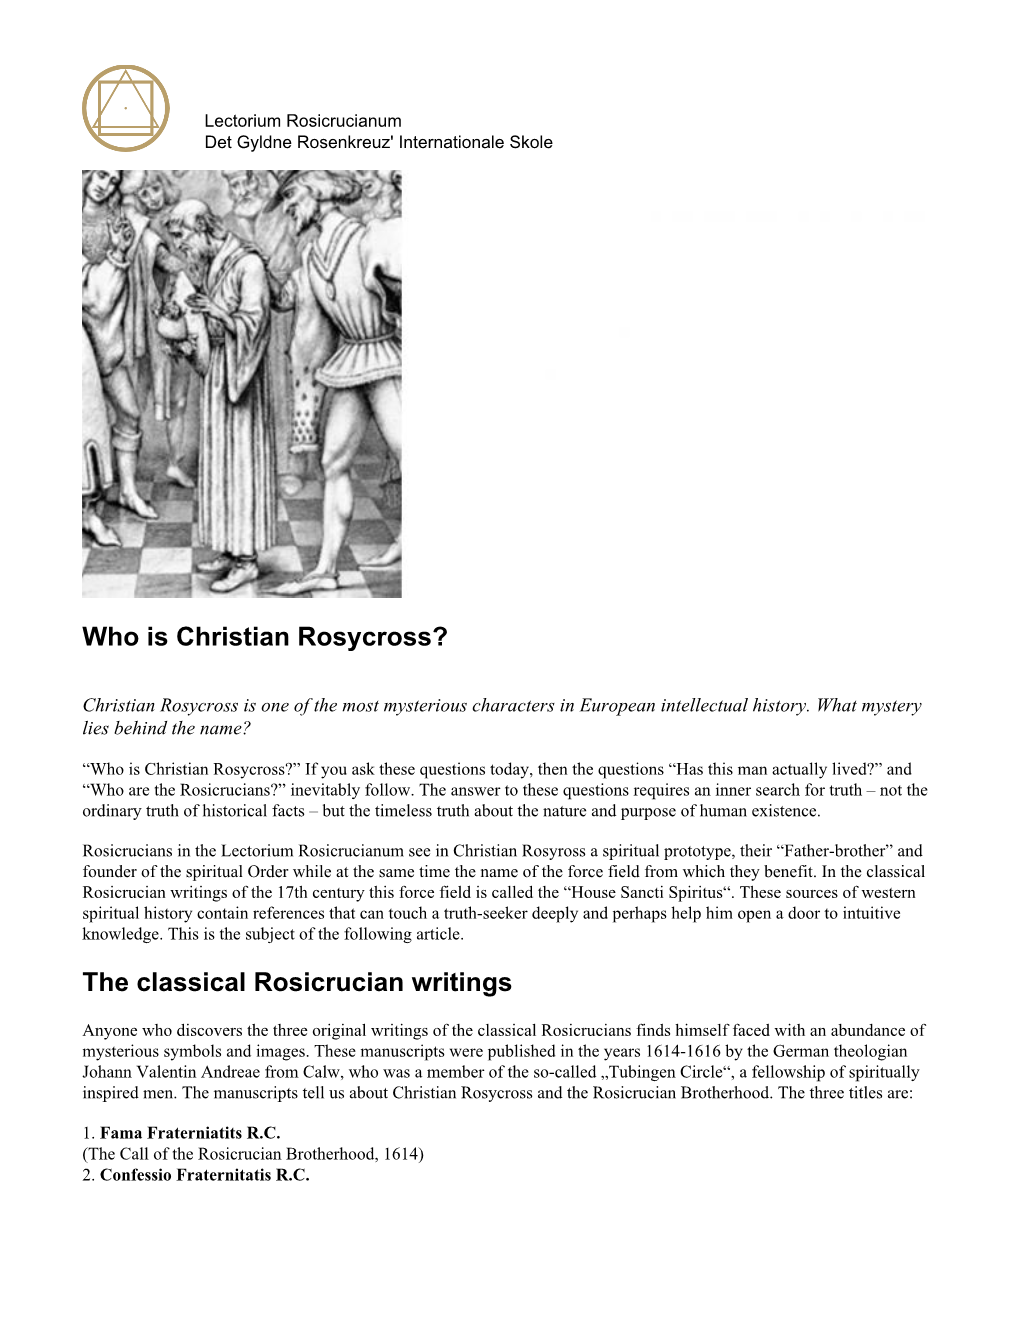 Who Is Christian Rosycross? the Classical Rosicrucian Writings